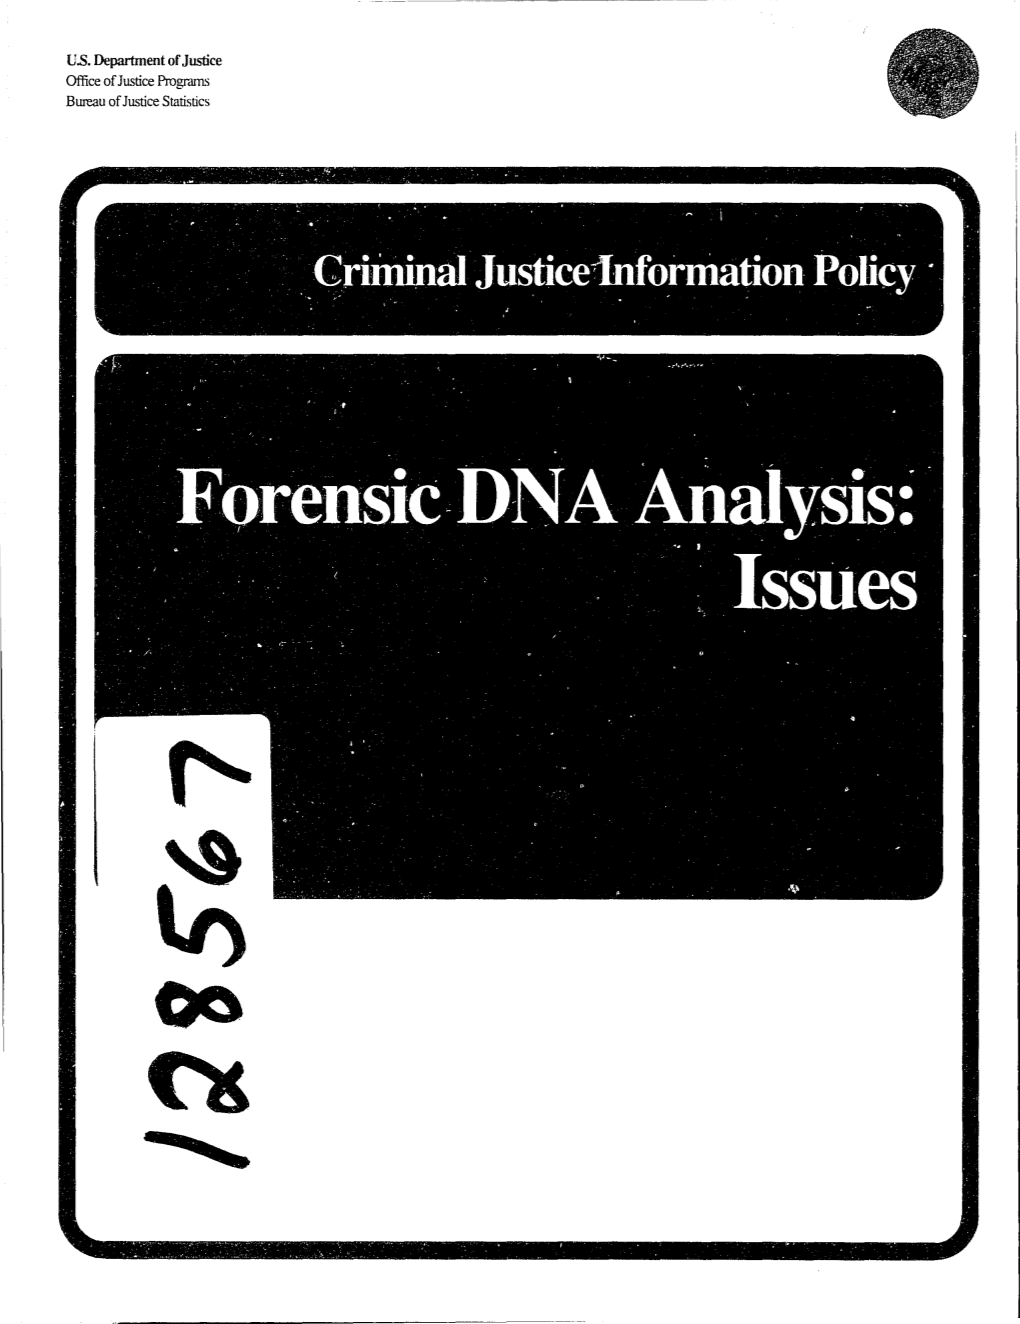 Forensic DNA Analysis: Issues